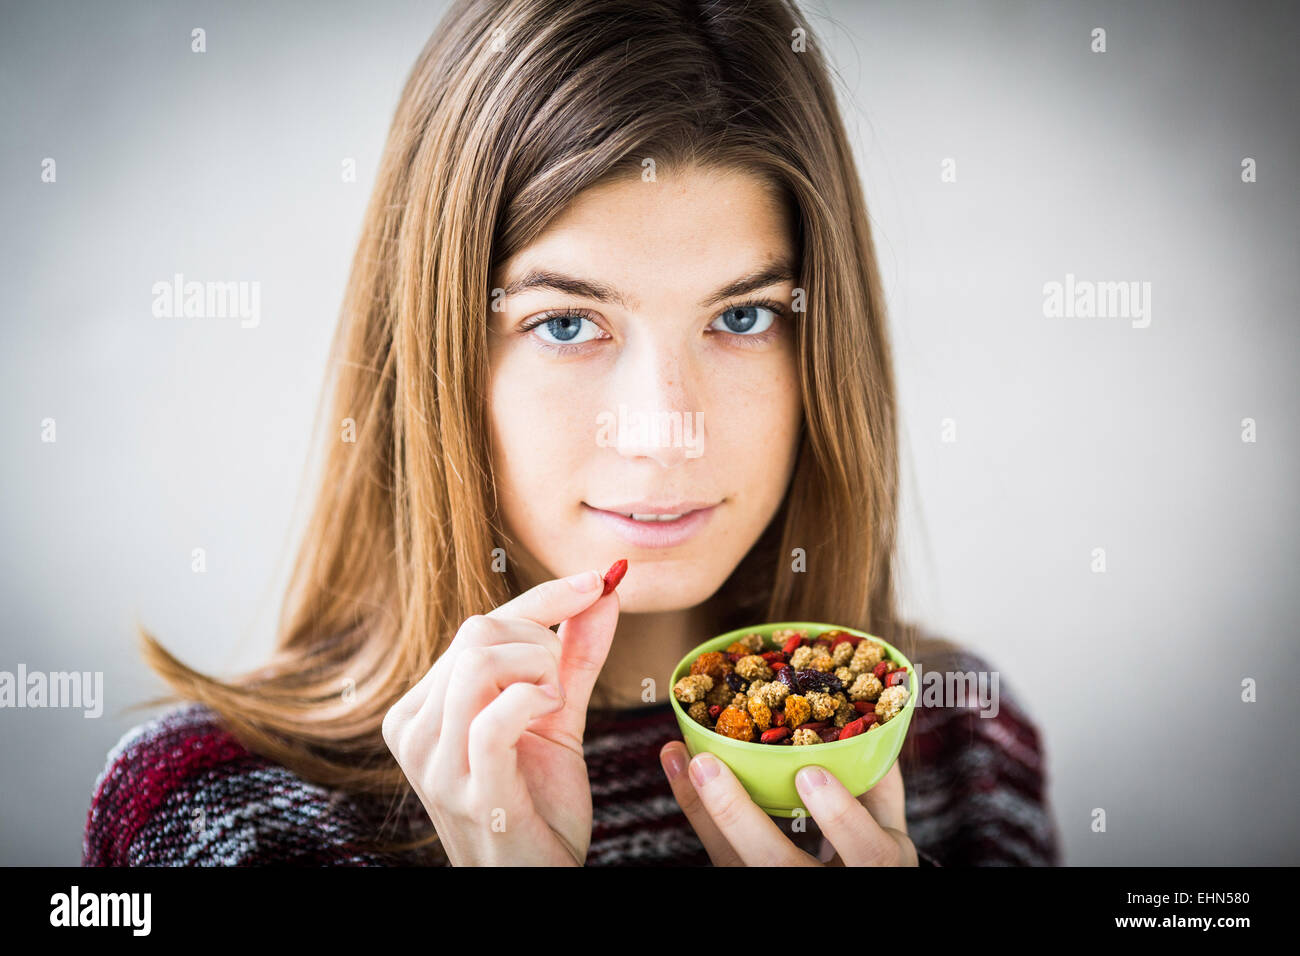 Woman eating several nuts. Stock Photo